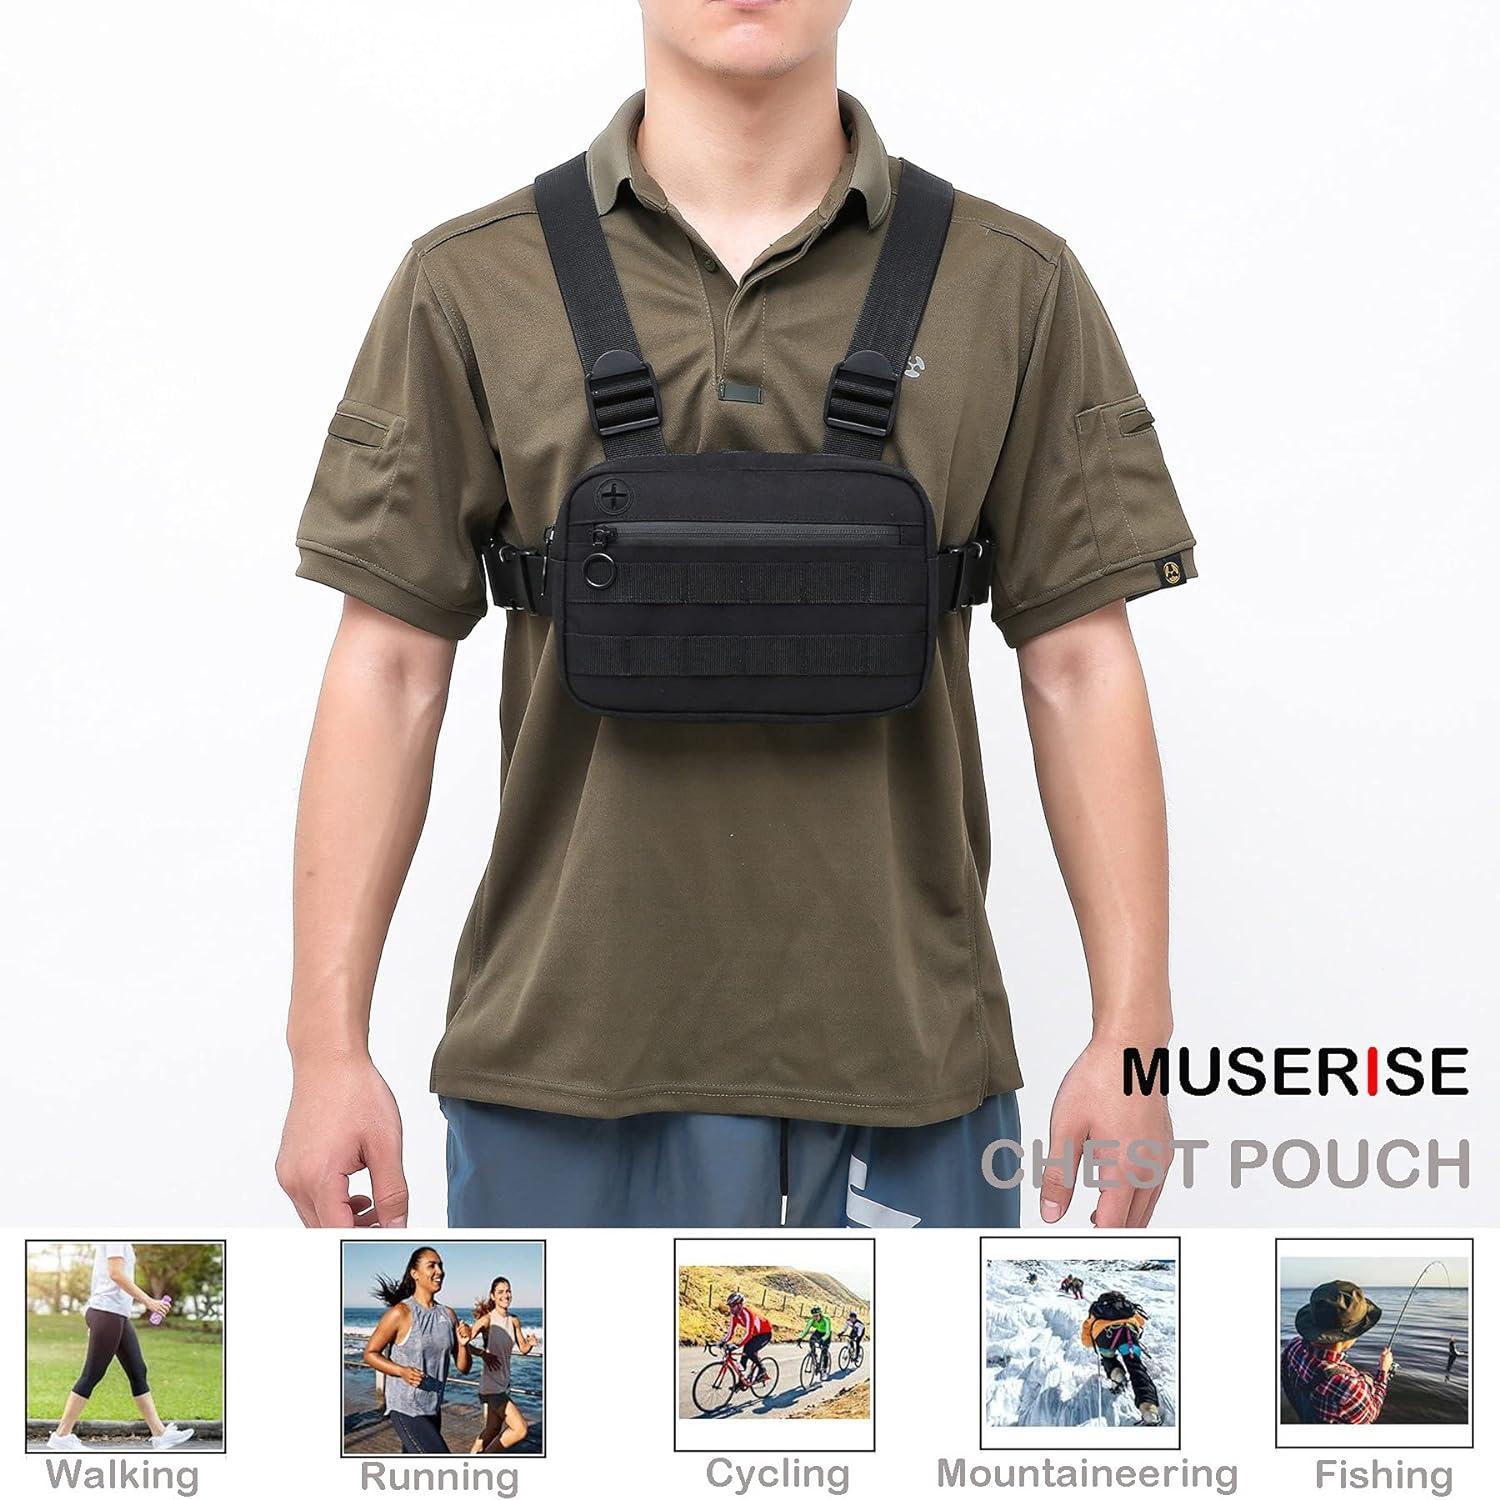  Muserise Outdoor Sports Utility Chest Pack,Tactical